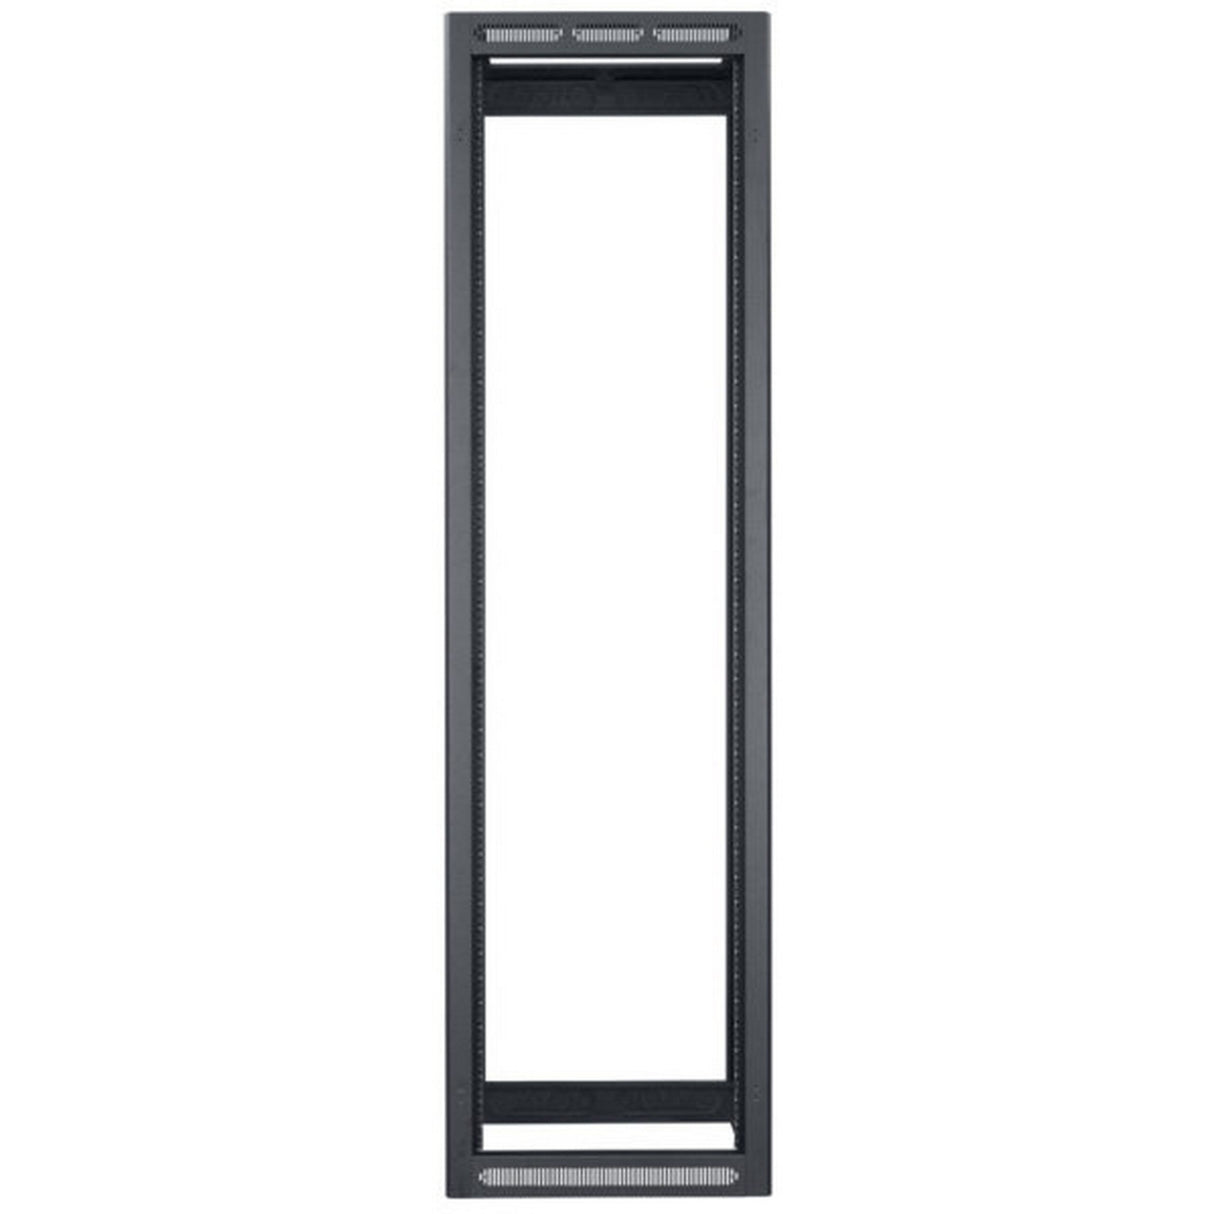 Lowell LER-4422-LRD Enclosed Rack without Rear Door, 44 x 22 Inch